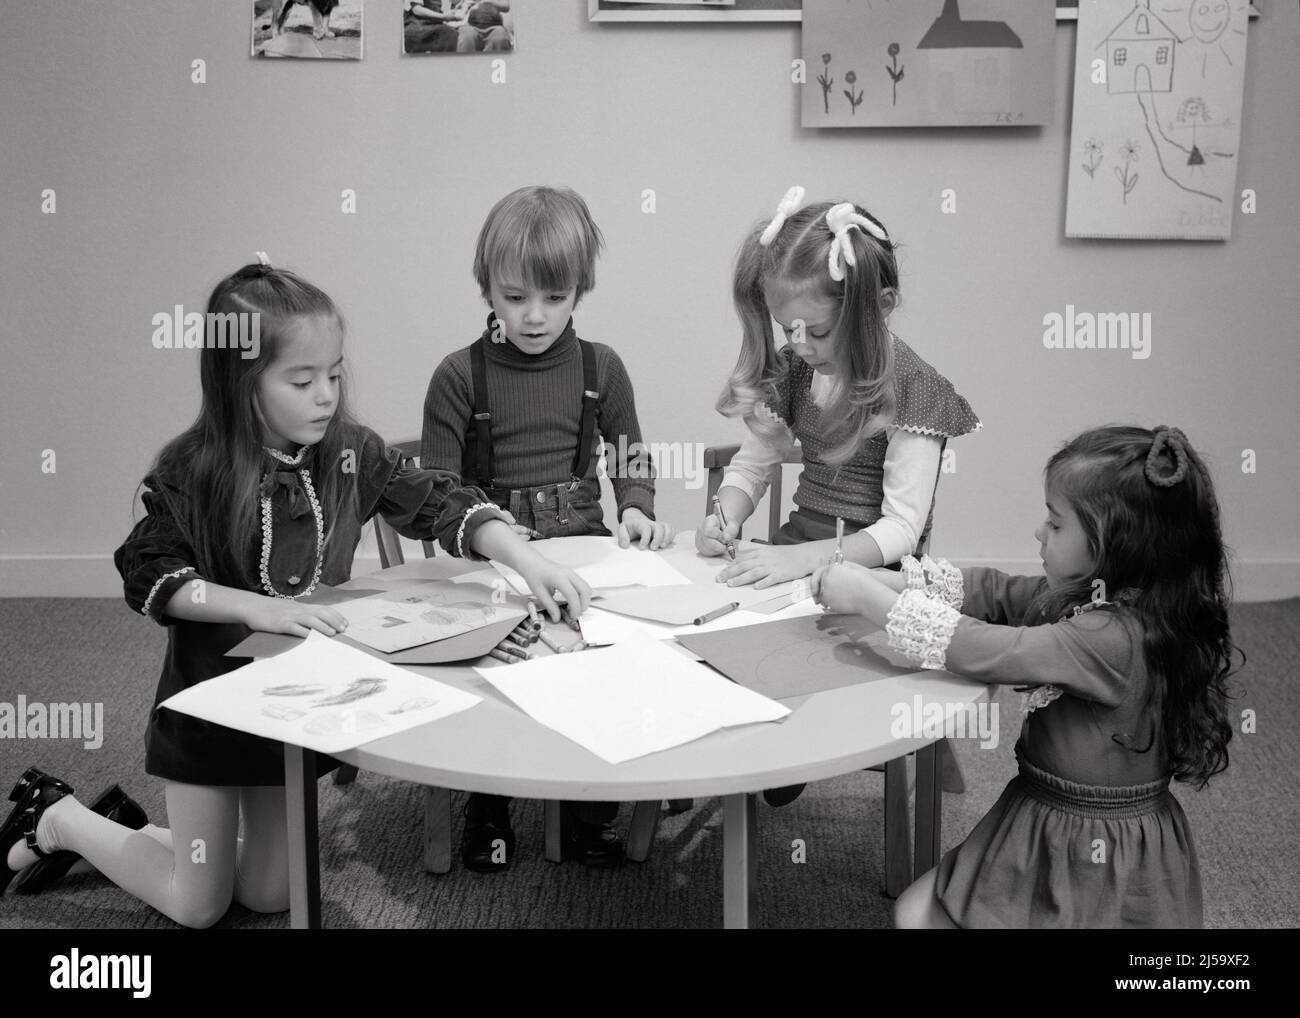 1970s 4 KIDS 1 BOY AND 3 GIRLS KNEELING AROUND A LOW TABLE COLORING DRAWING MAKING ART - j13439 HAR001 HARS TEAMWORK JOY LIFESTYLE FEMALES BROTHERS COPY SPACE FRIENDSHIP HALF-LENGTH PERSONS MALES SIBLINGS SISTERS B&W KNEELING HAPPINESS KINDERGARTEN PRESCHOOL HIGH ANGLE AND KNOWLEDGE LEADERSHIP RECREATION SIBLING CRAYONS PRE-SCHOOL STYLISH CREATIVITY GROWTH JUVENILES LOW TOGETHERNESS BLACK AND WHITE CAUCASIAN ETHNICITY COLORING HAR001 OLD FASHIONED Stock Photo